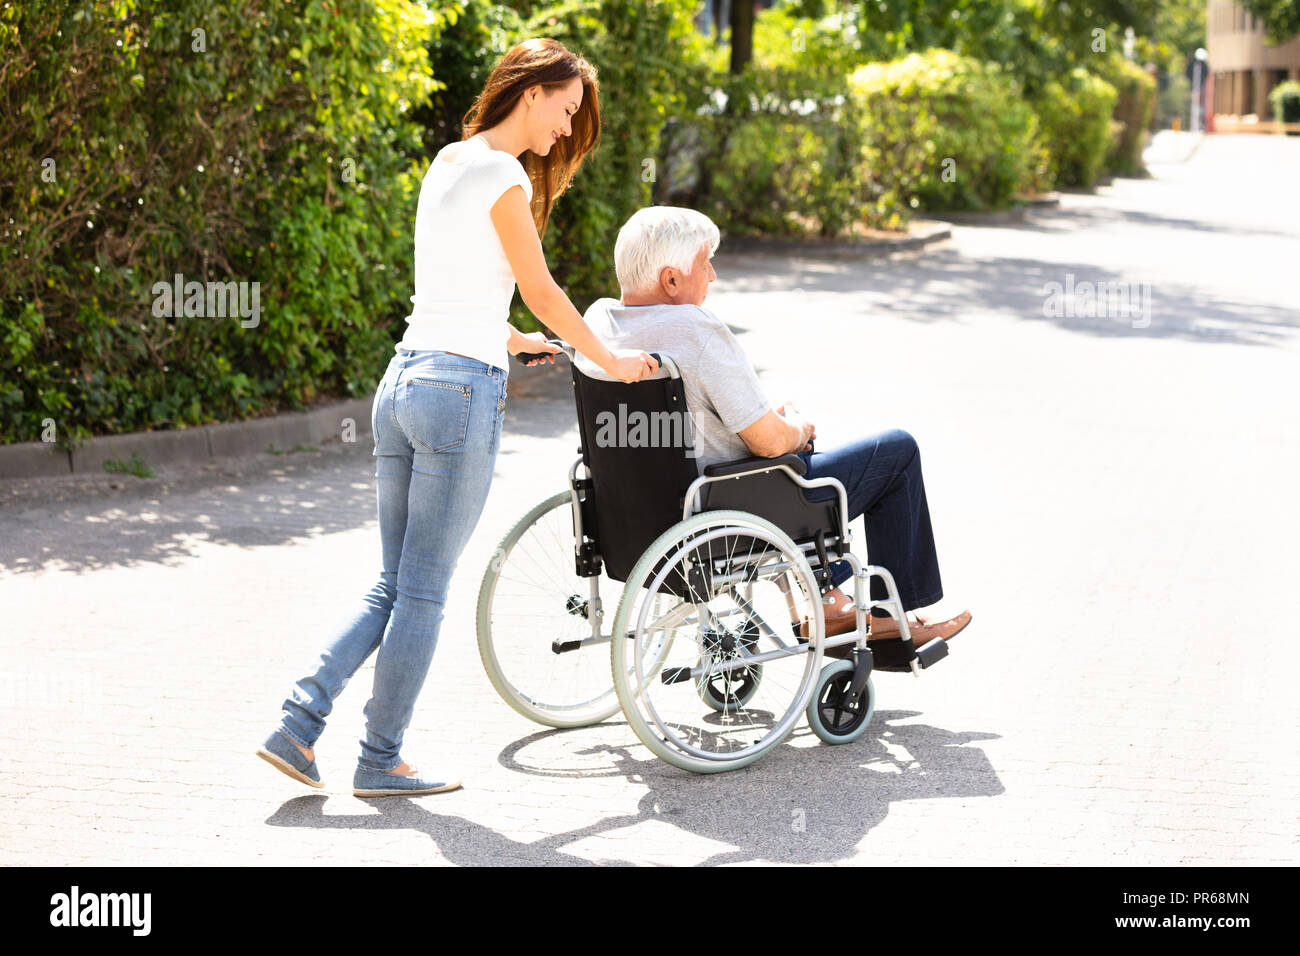 Young Woman Assisting Her Disabled Father On Wheelchair At Outdoors Stock Photo